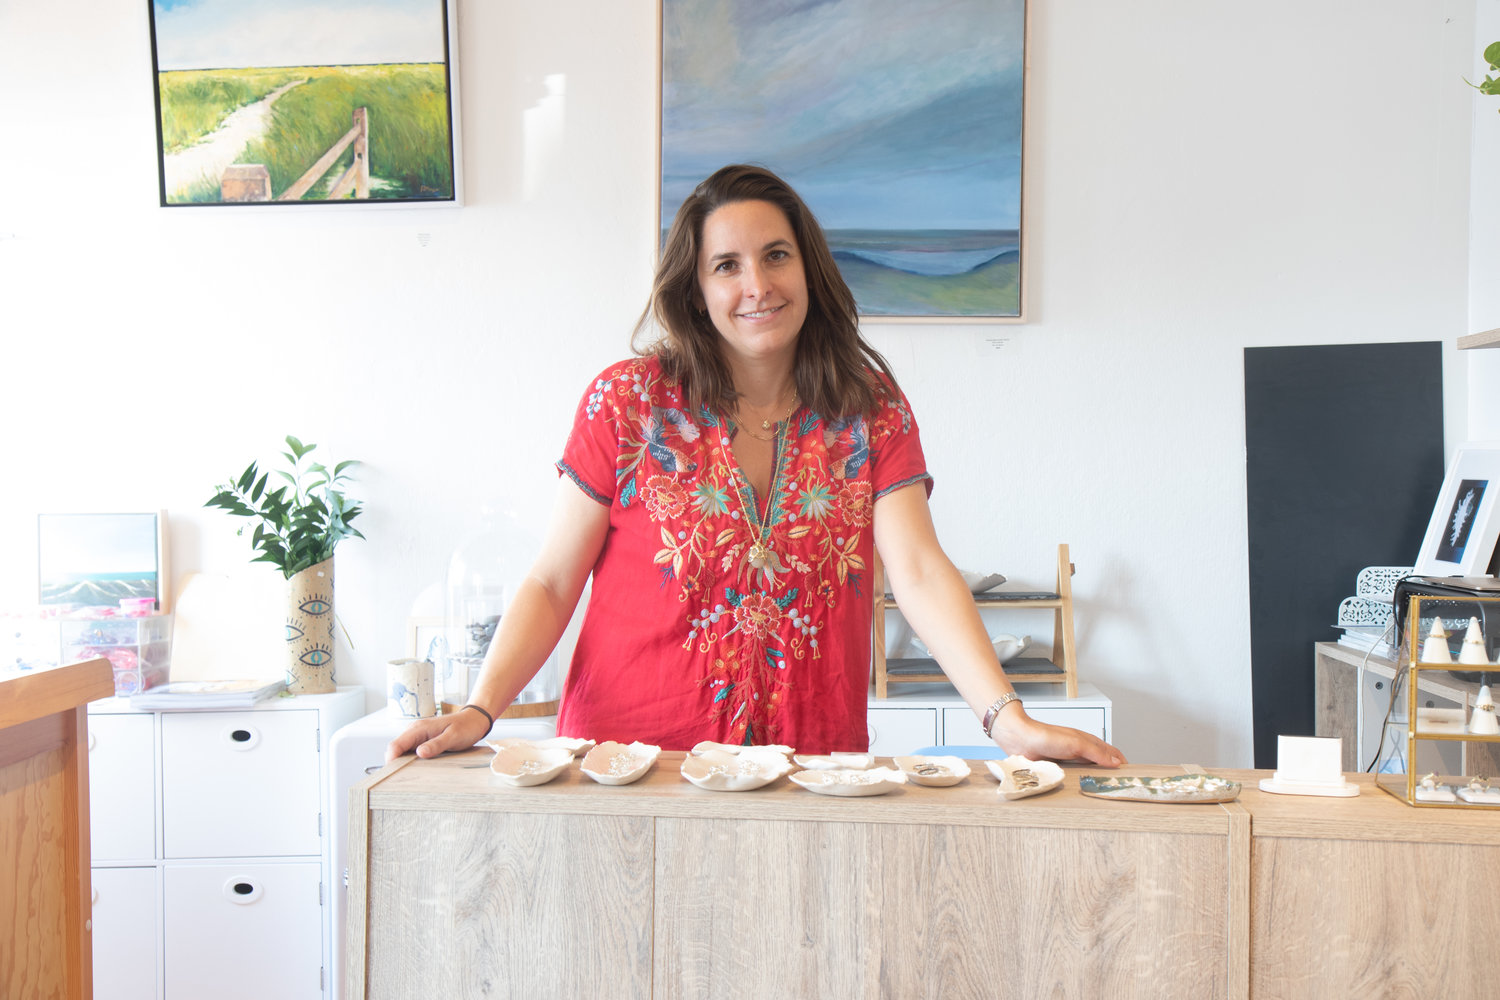 Icarus & Co. co-owner Caroline Mullen in the Old South Wharf jewelry boutique she shares with watercolor painter and photographer Krys DeMauro. Mullen’s jewelry transforms Nantucket’s natural beauty into wearable art.